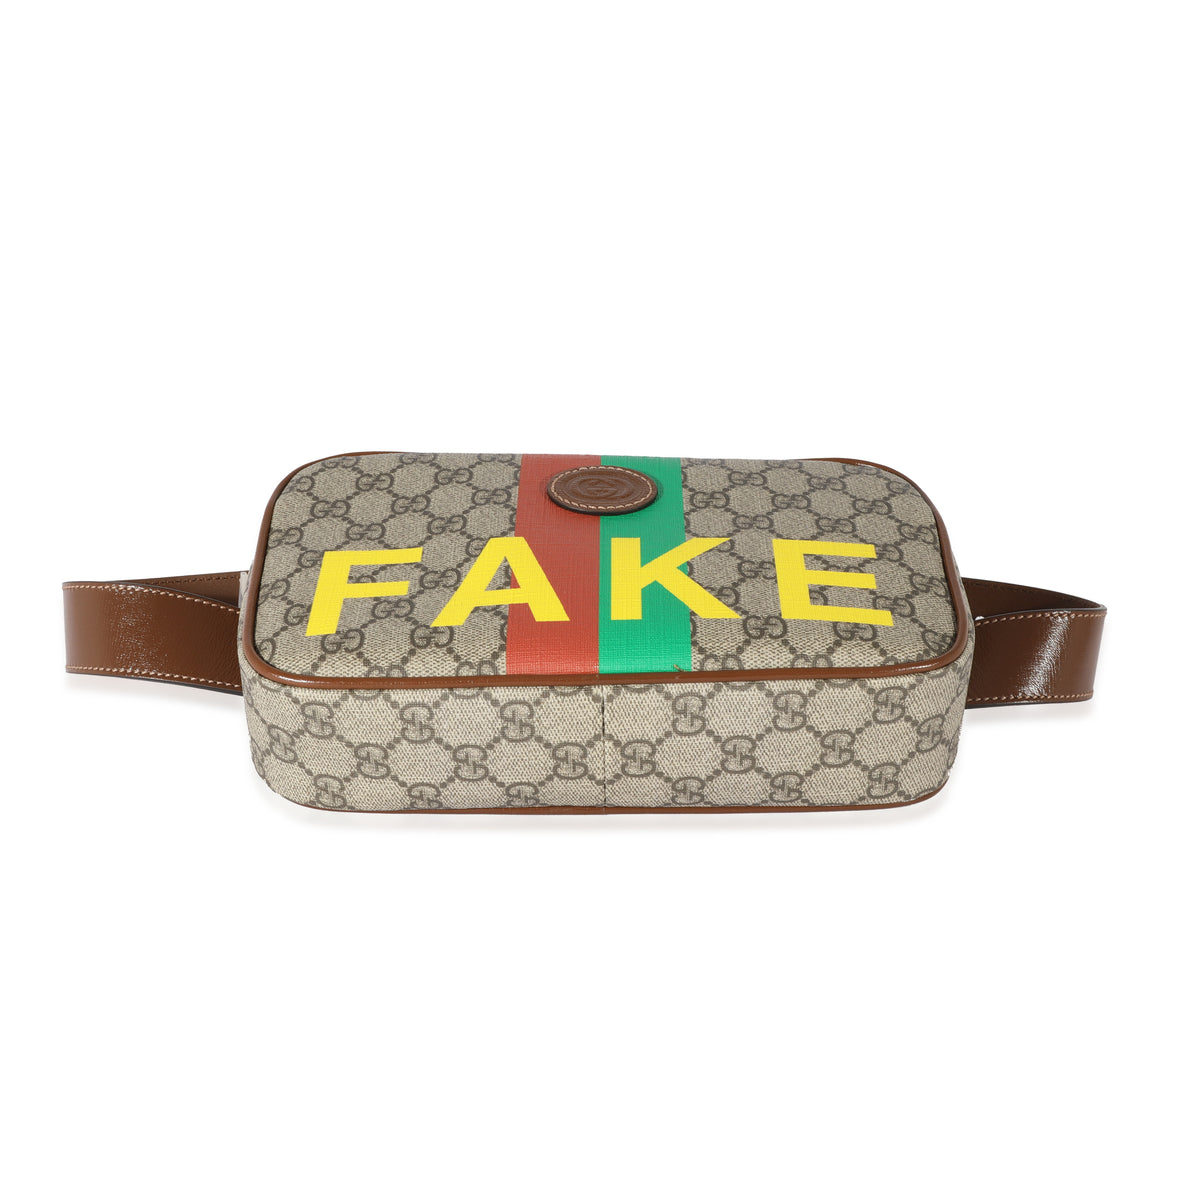 Gucci GG Marmont Belt Fake Vs Real Guide  Gucci belt, Gucci belt outfit,  Fake designer bags